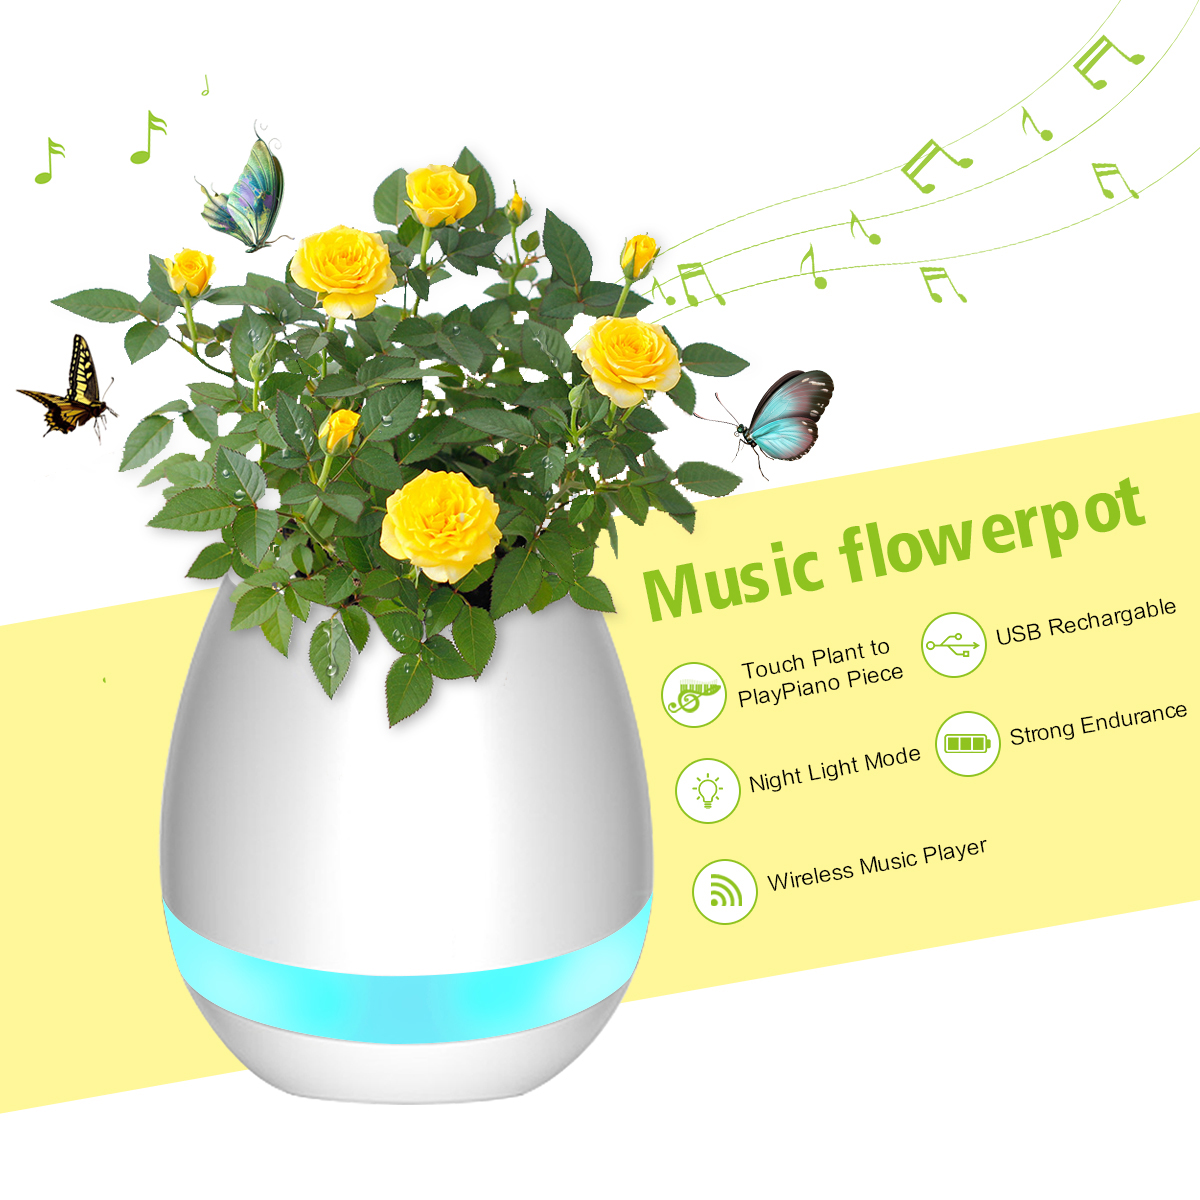 Music-Flower-Pot-Smart-Touch-Plant-Play-Sevven-Color-Lamp-Piano-LED-Lamp-Light-bluetooth-1964047-2